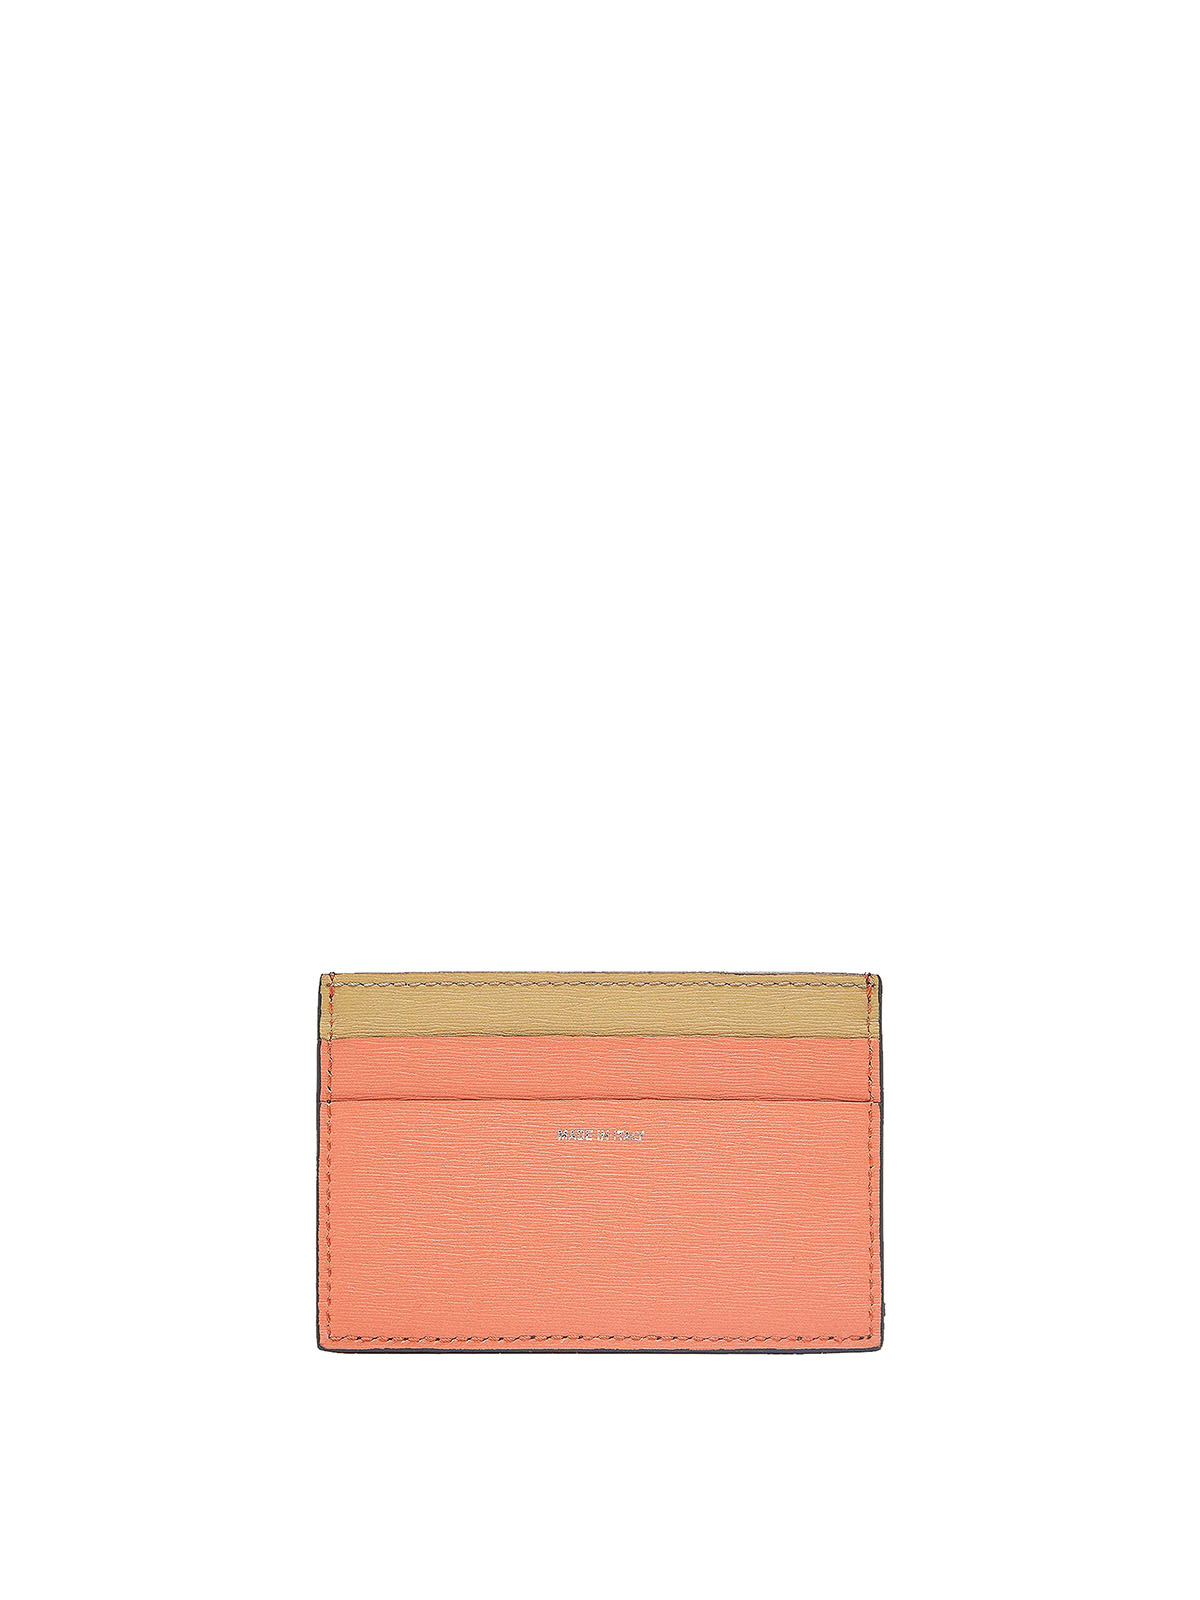 Shop Paul Smith Textured Leather Card Holder In Black